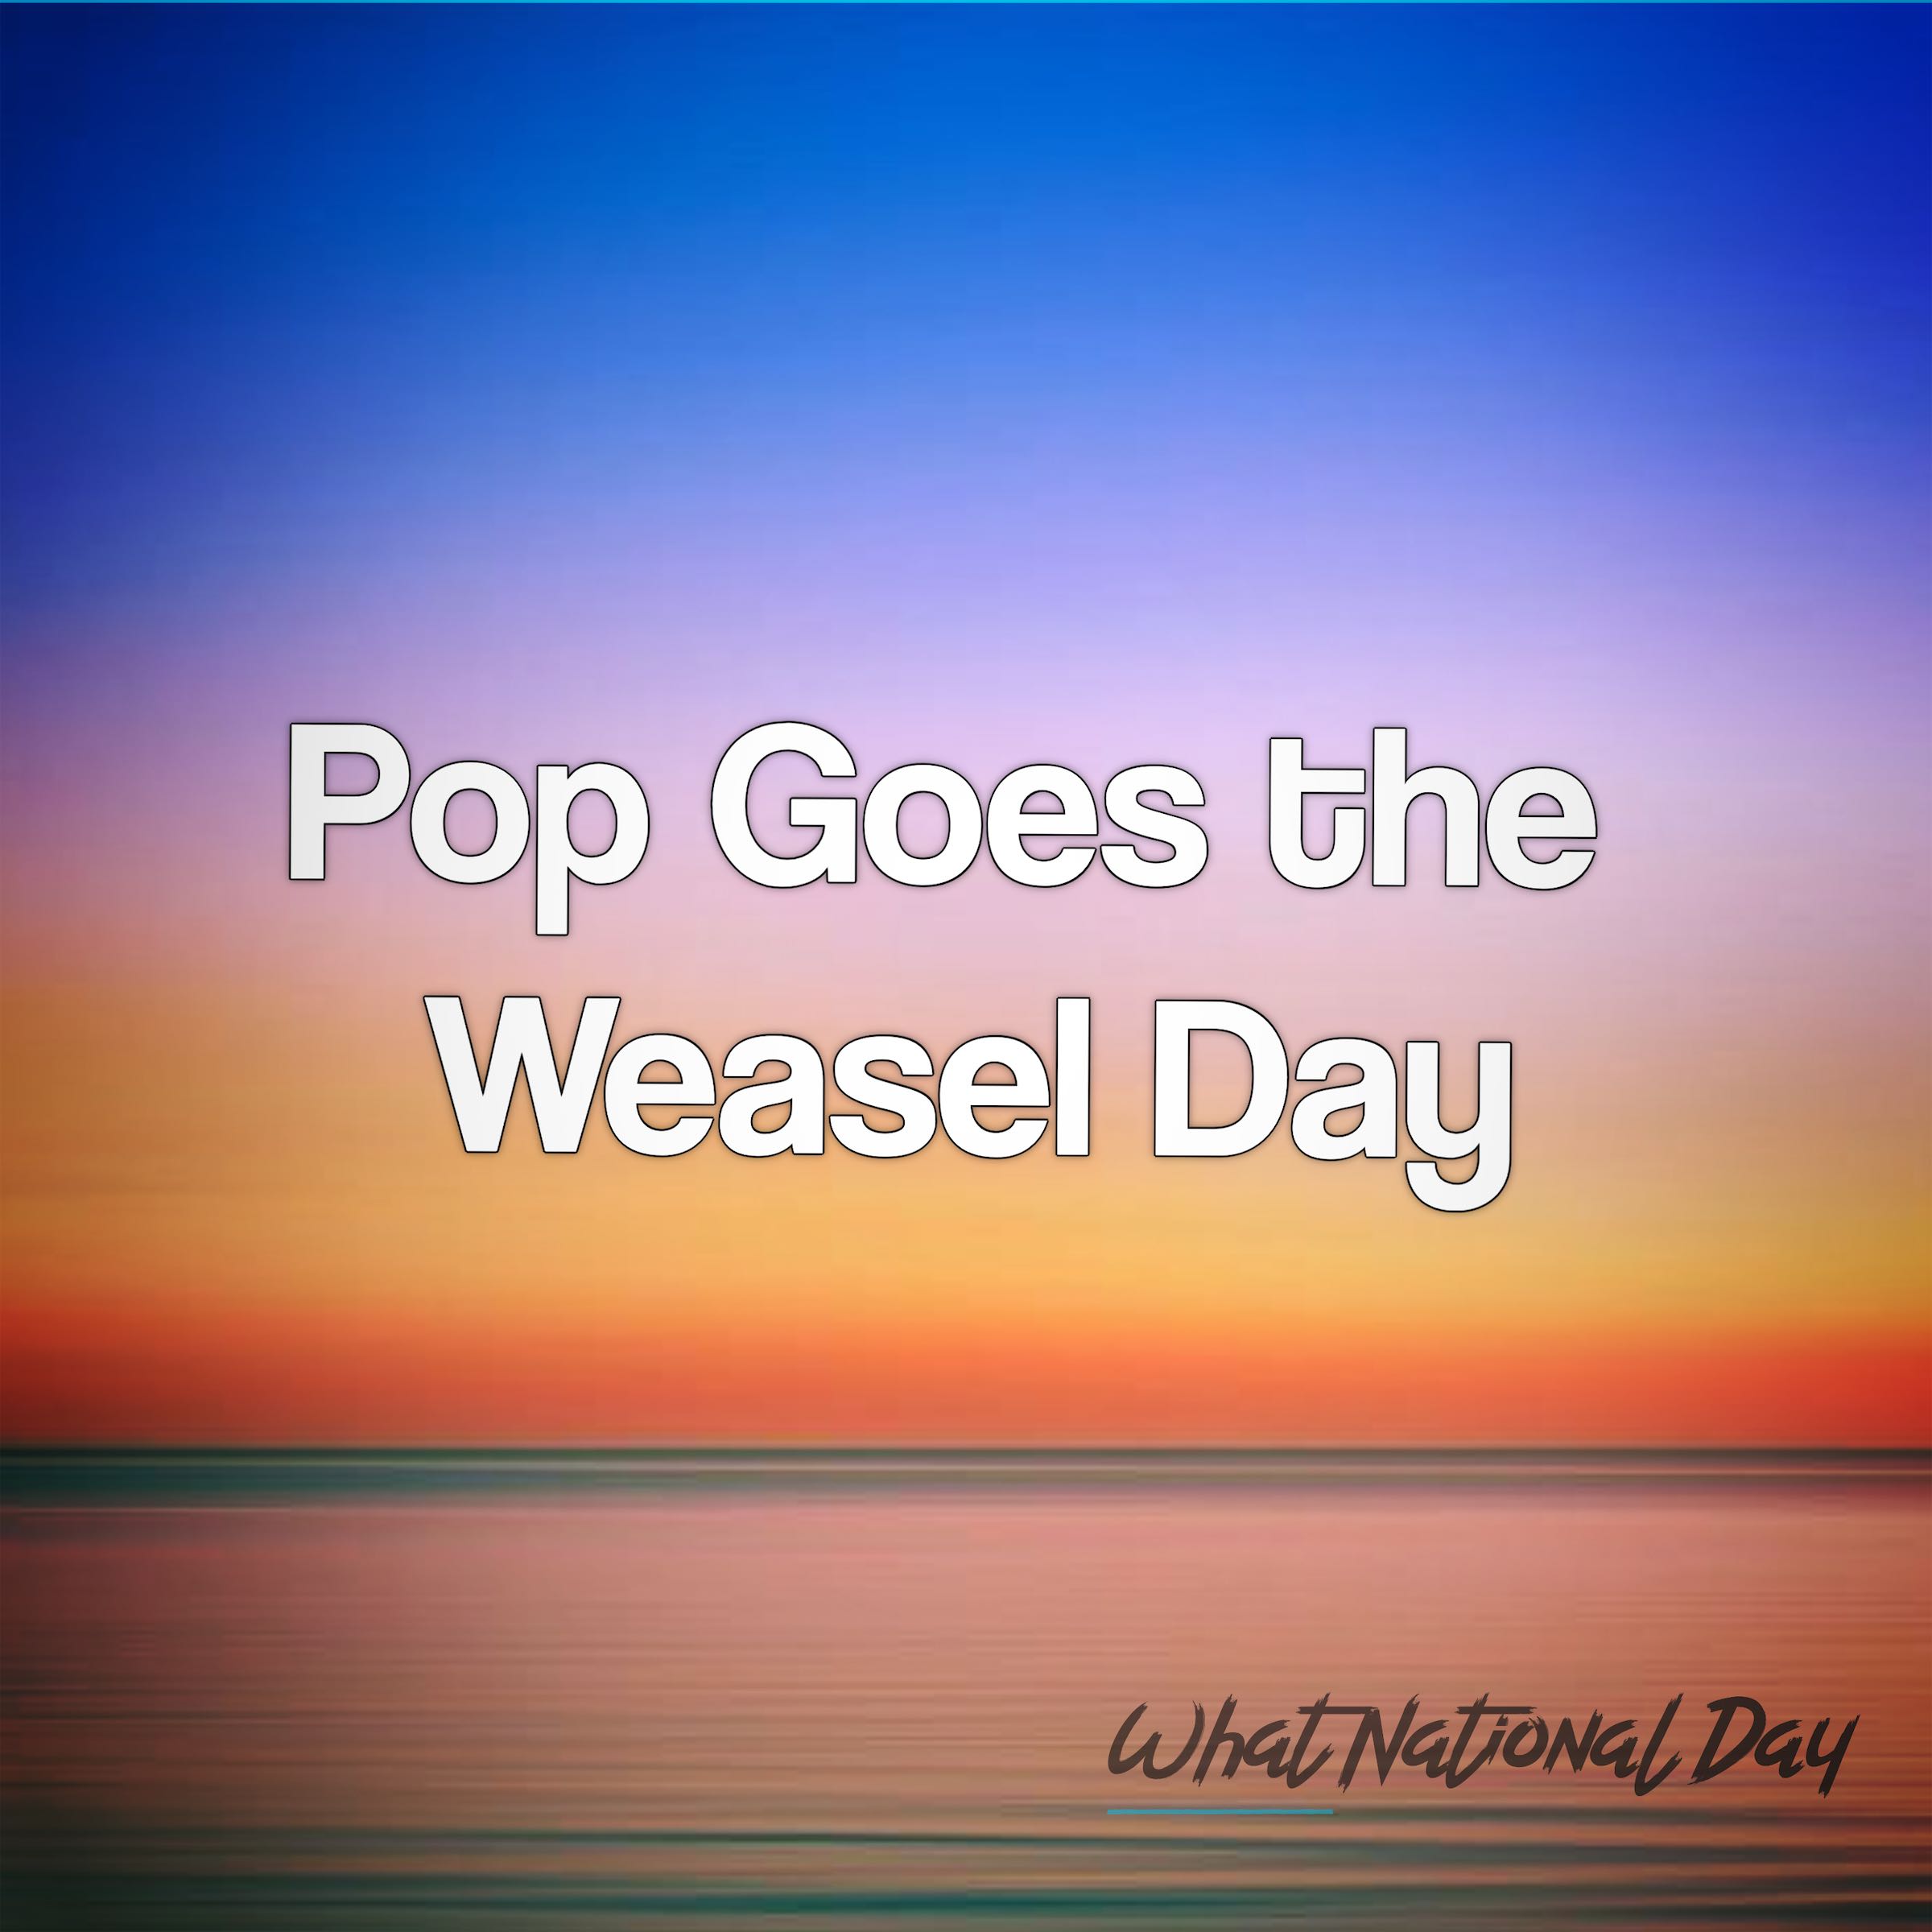 Pop Goes the Weasel Day